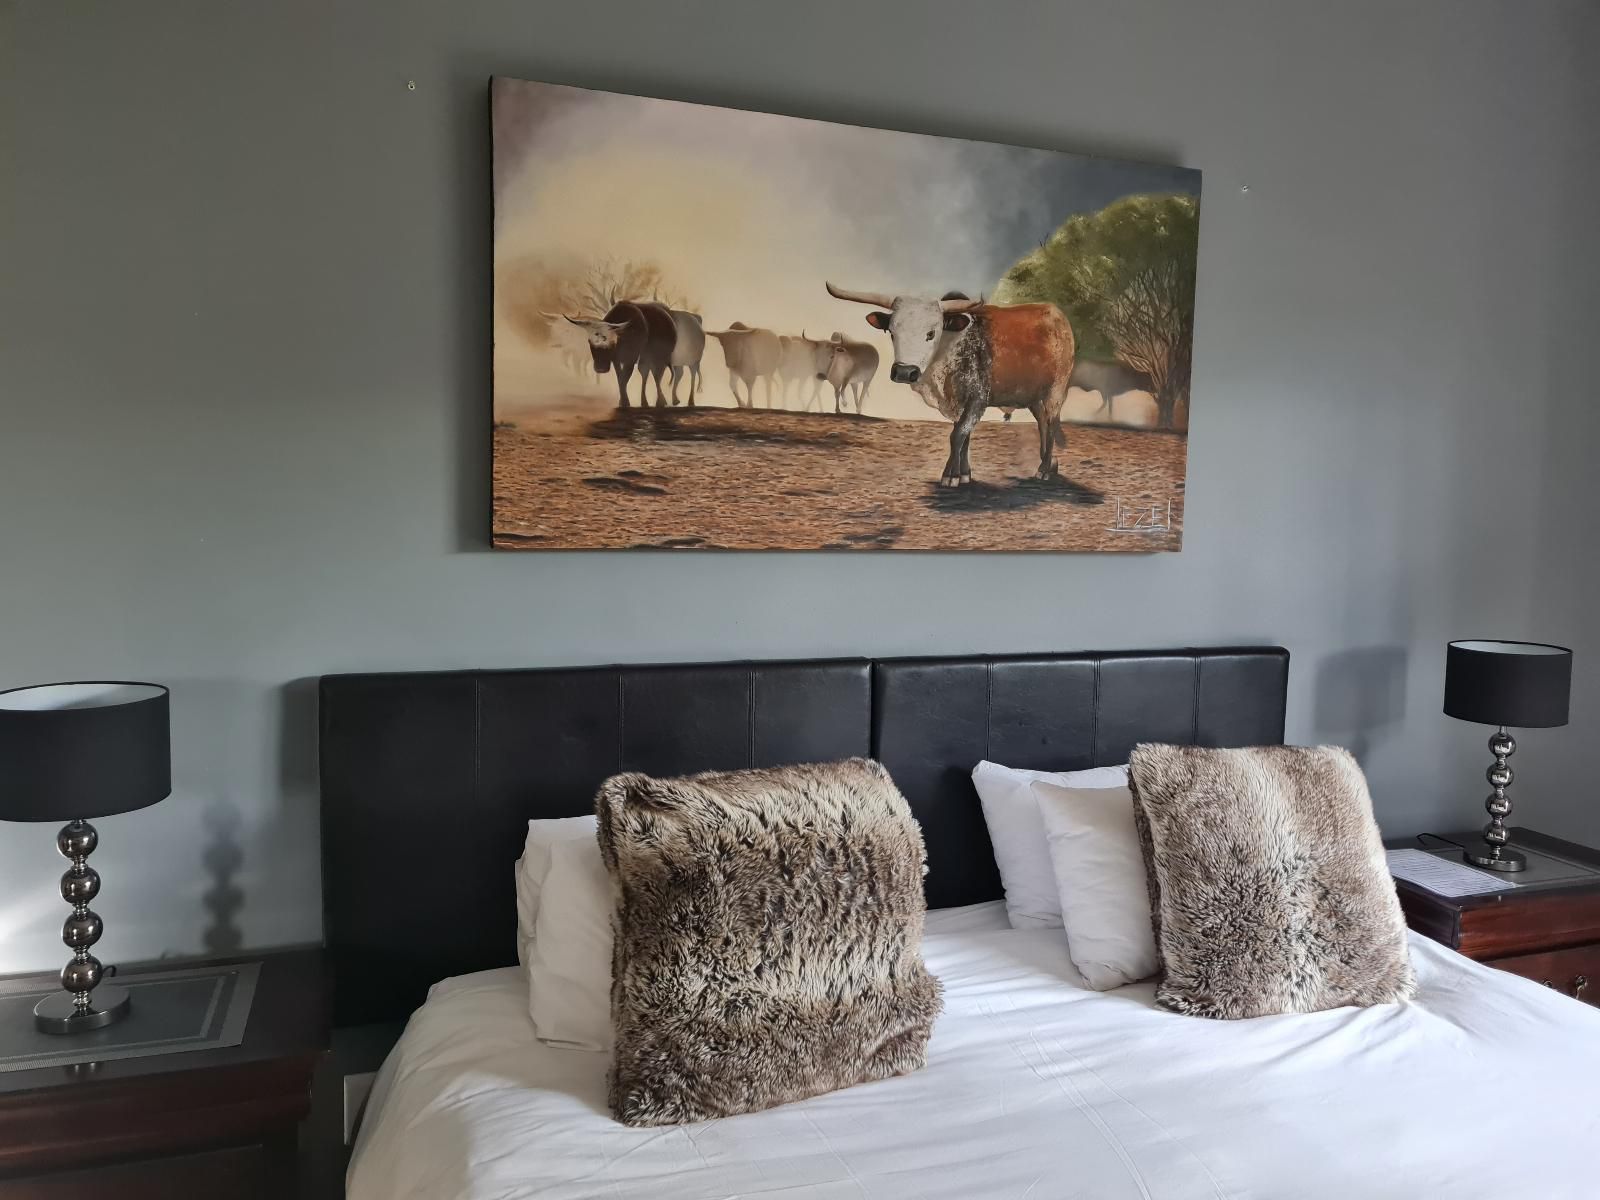 Be My Guest Guesthouse Upington Northern Cape South Africa Bedroom